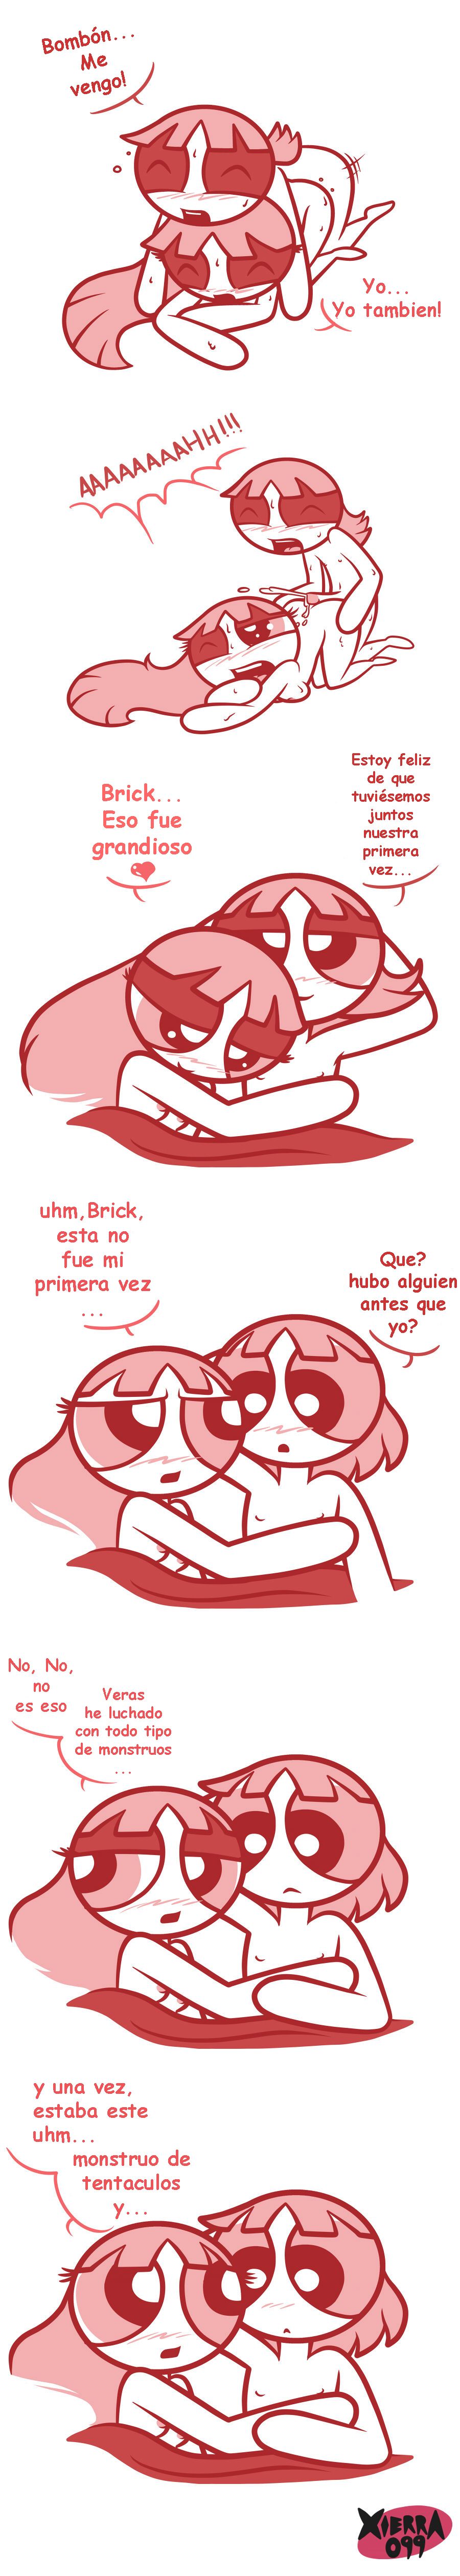 [Xierra099] PPG Strips [Ongoing] Spanish 10